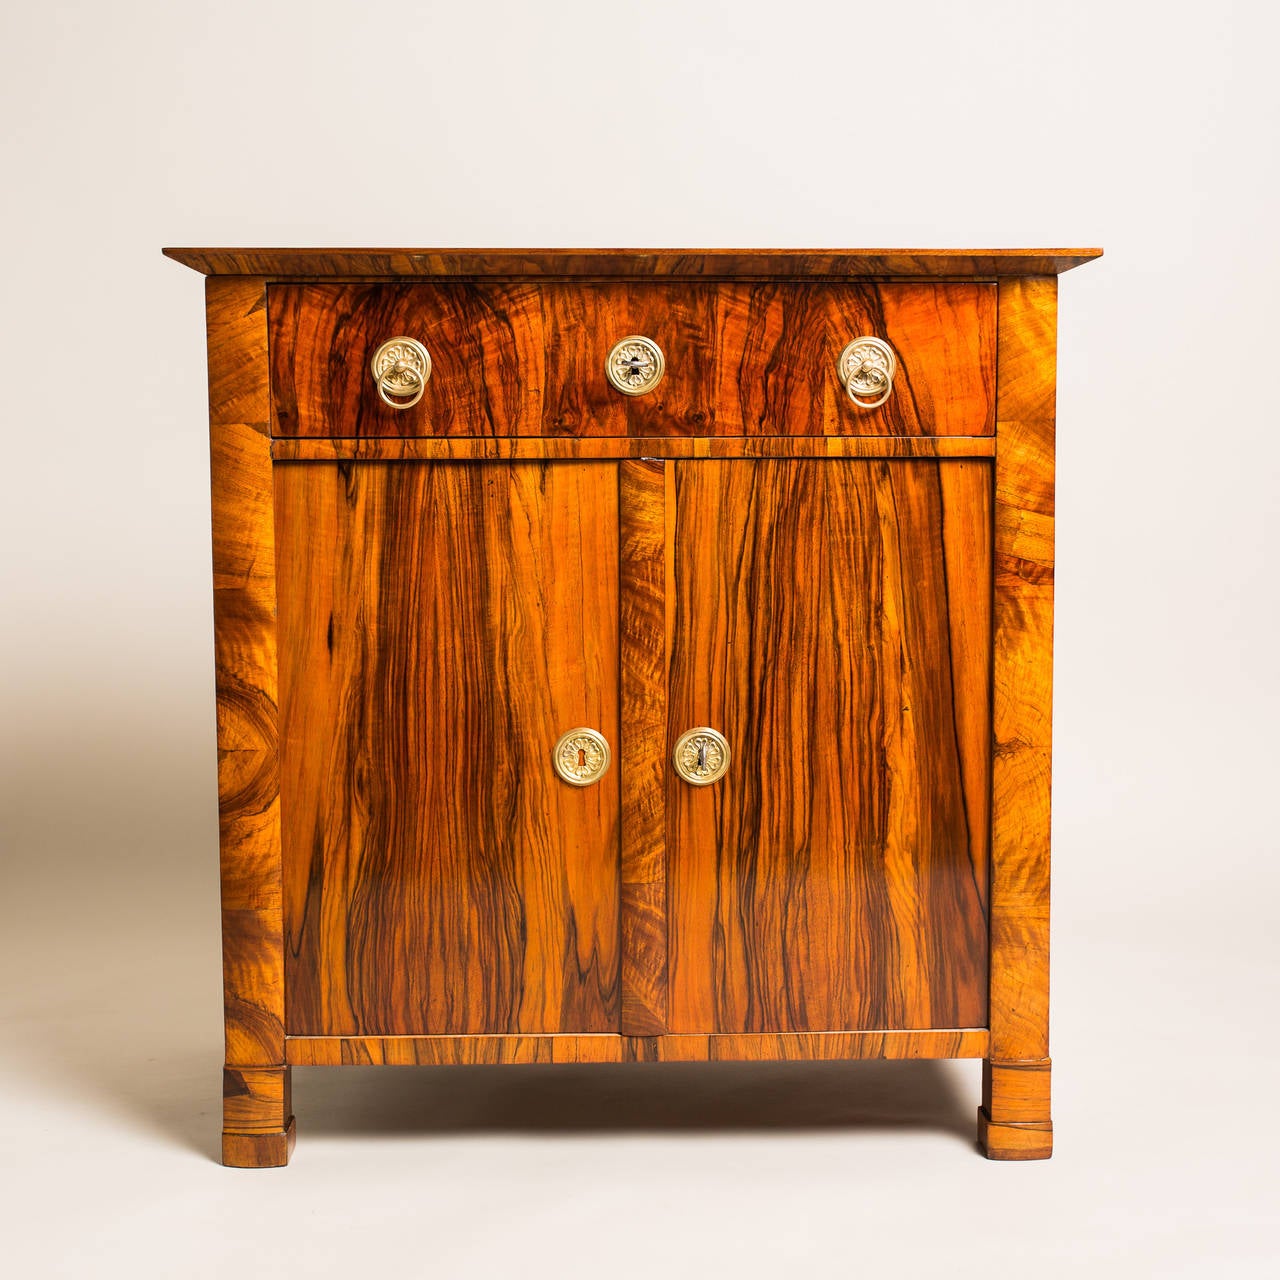 An antique item from the Biedermeier period that blends well in any context due to its simple yet charming minimalistic appearance. It was constructed from spruce wood, circa 1835, and veneered with walnut for a wonderful allure. The drawer sits